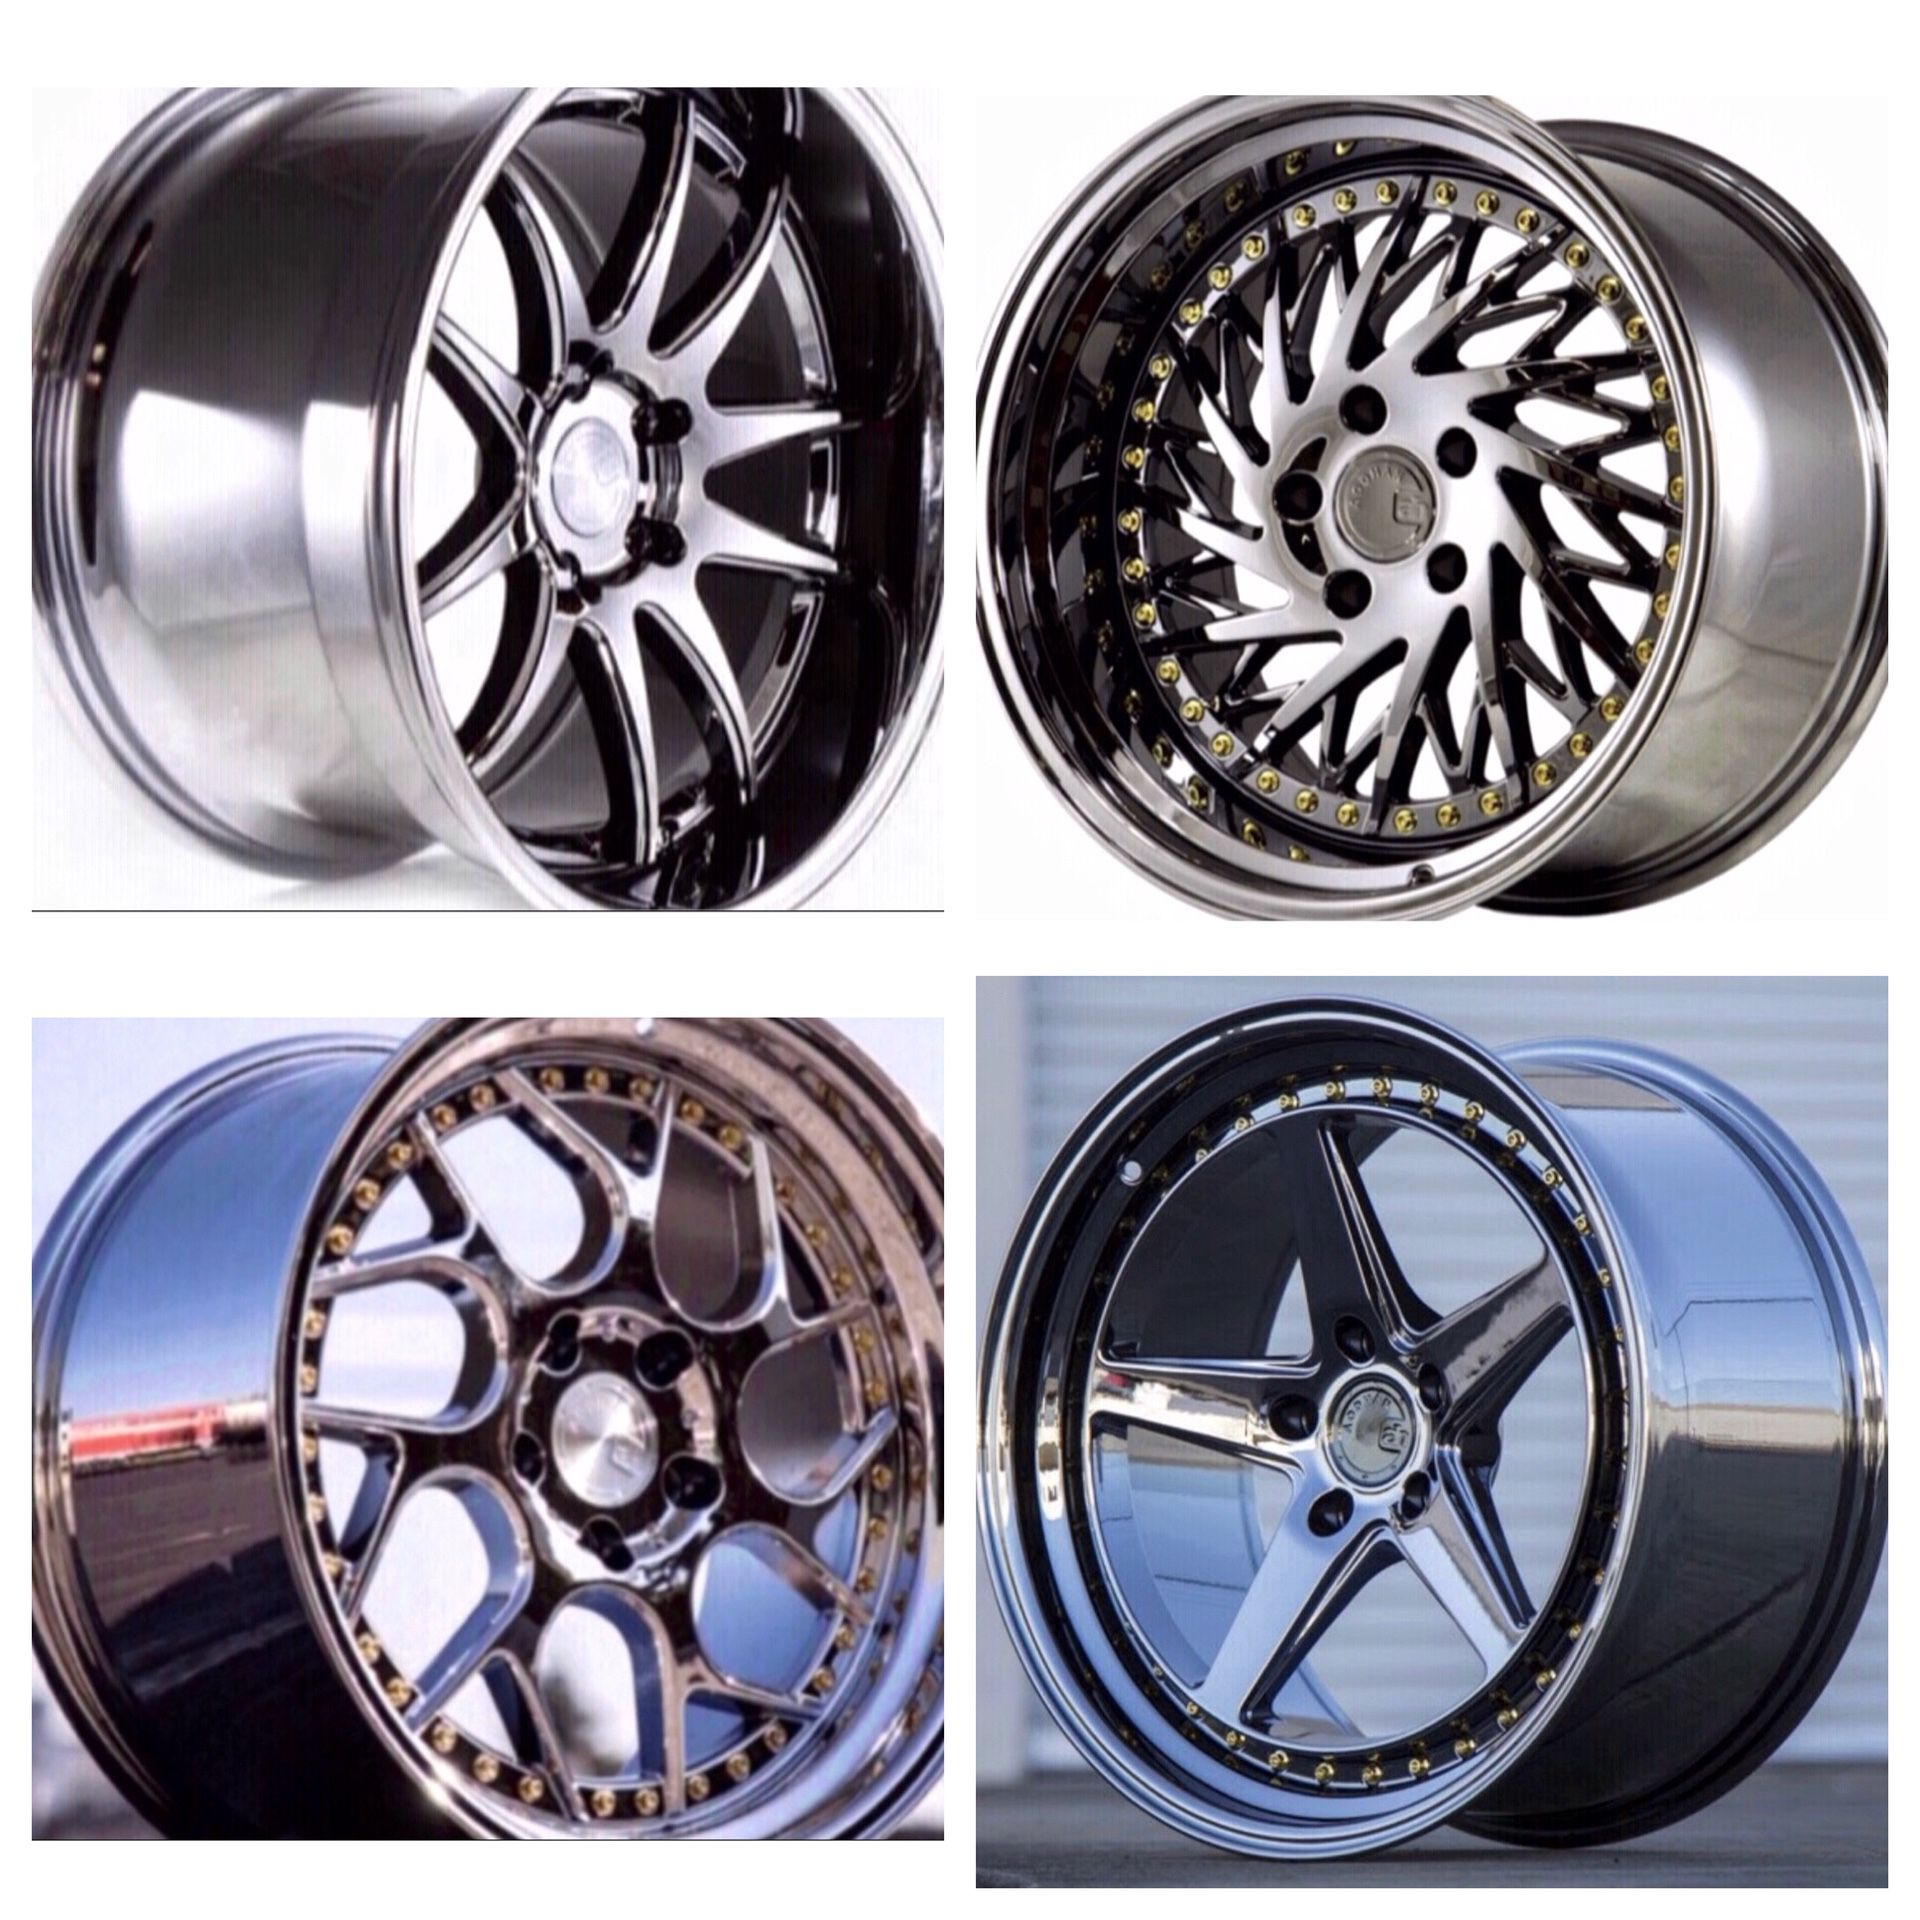 Aodhan 18 inch Rim 5x100 5x120 5x114 (only 50 down payment/ no credit check)